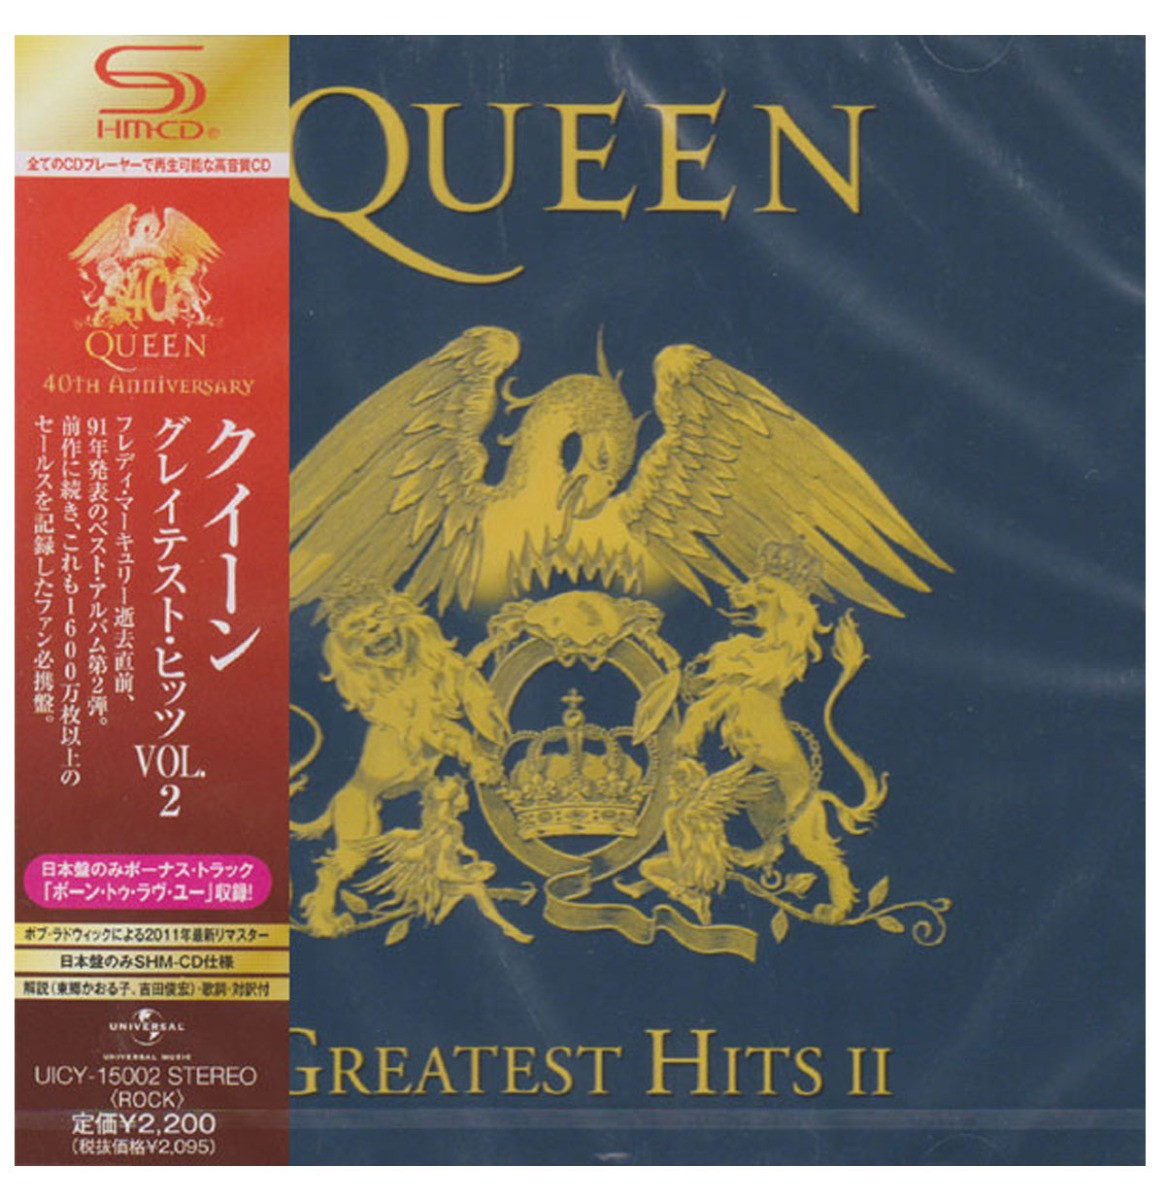 Queen - Greatest Hits II CD - 40th Anniversary Edition